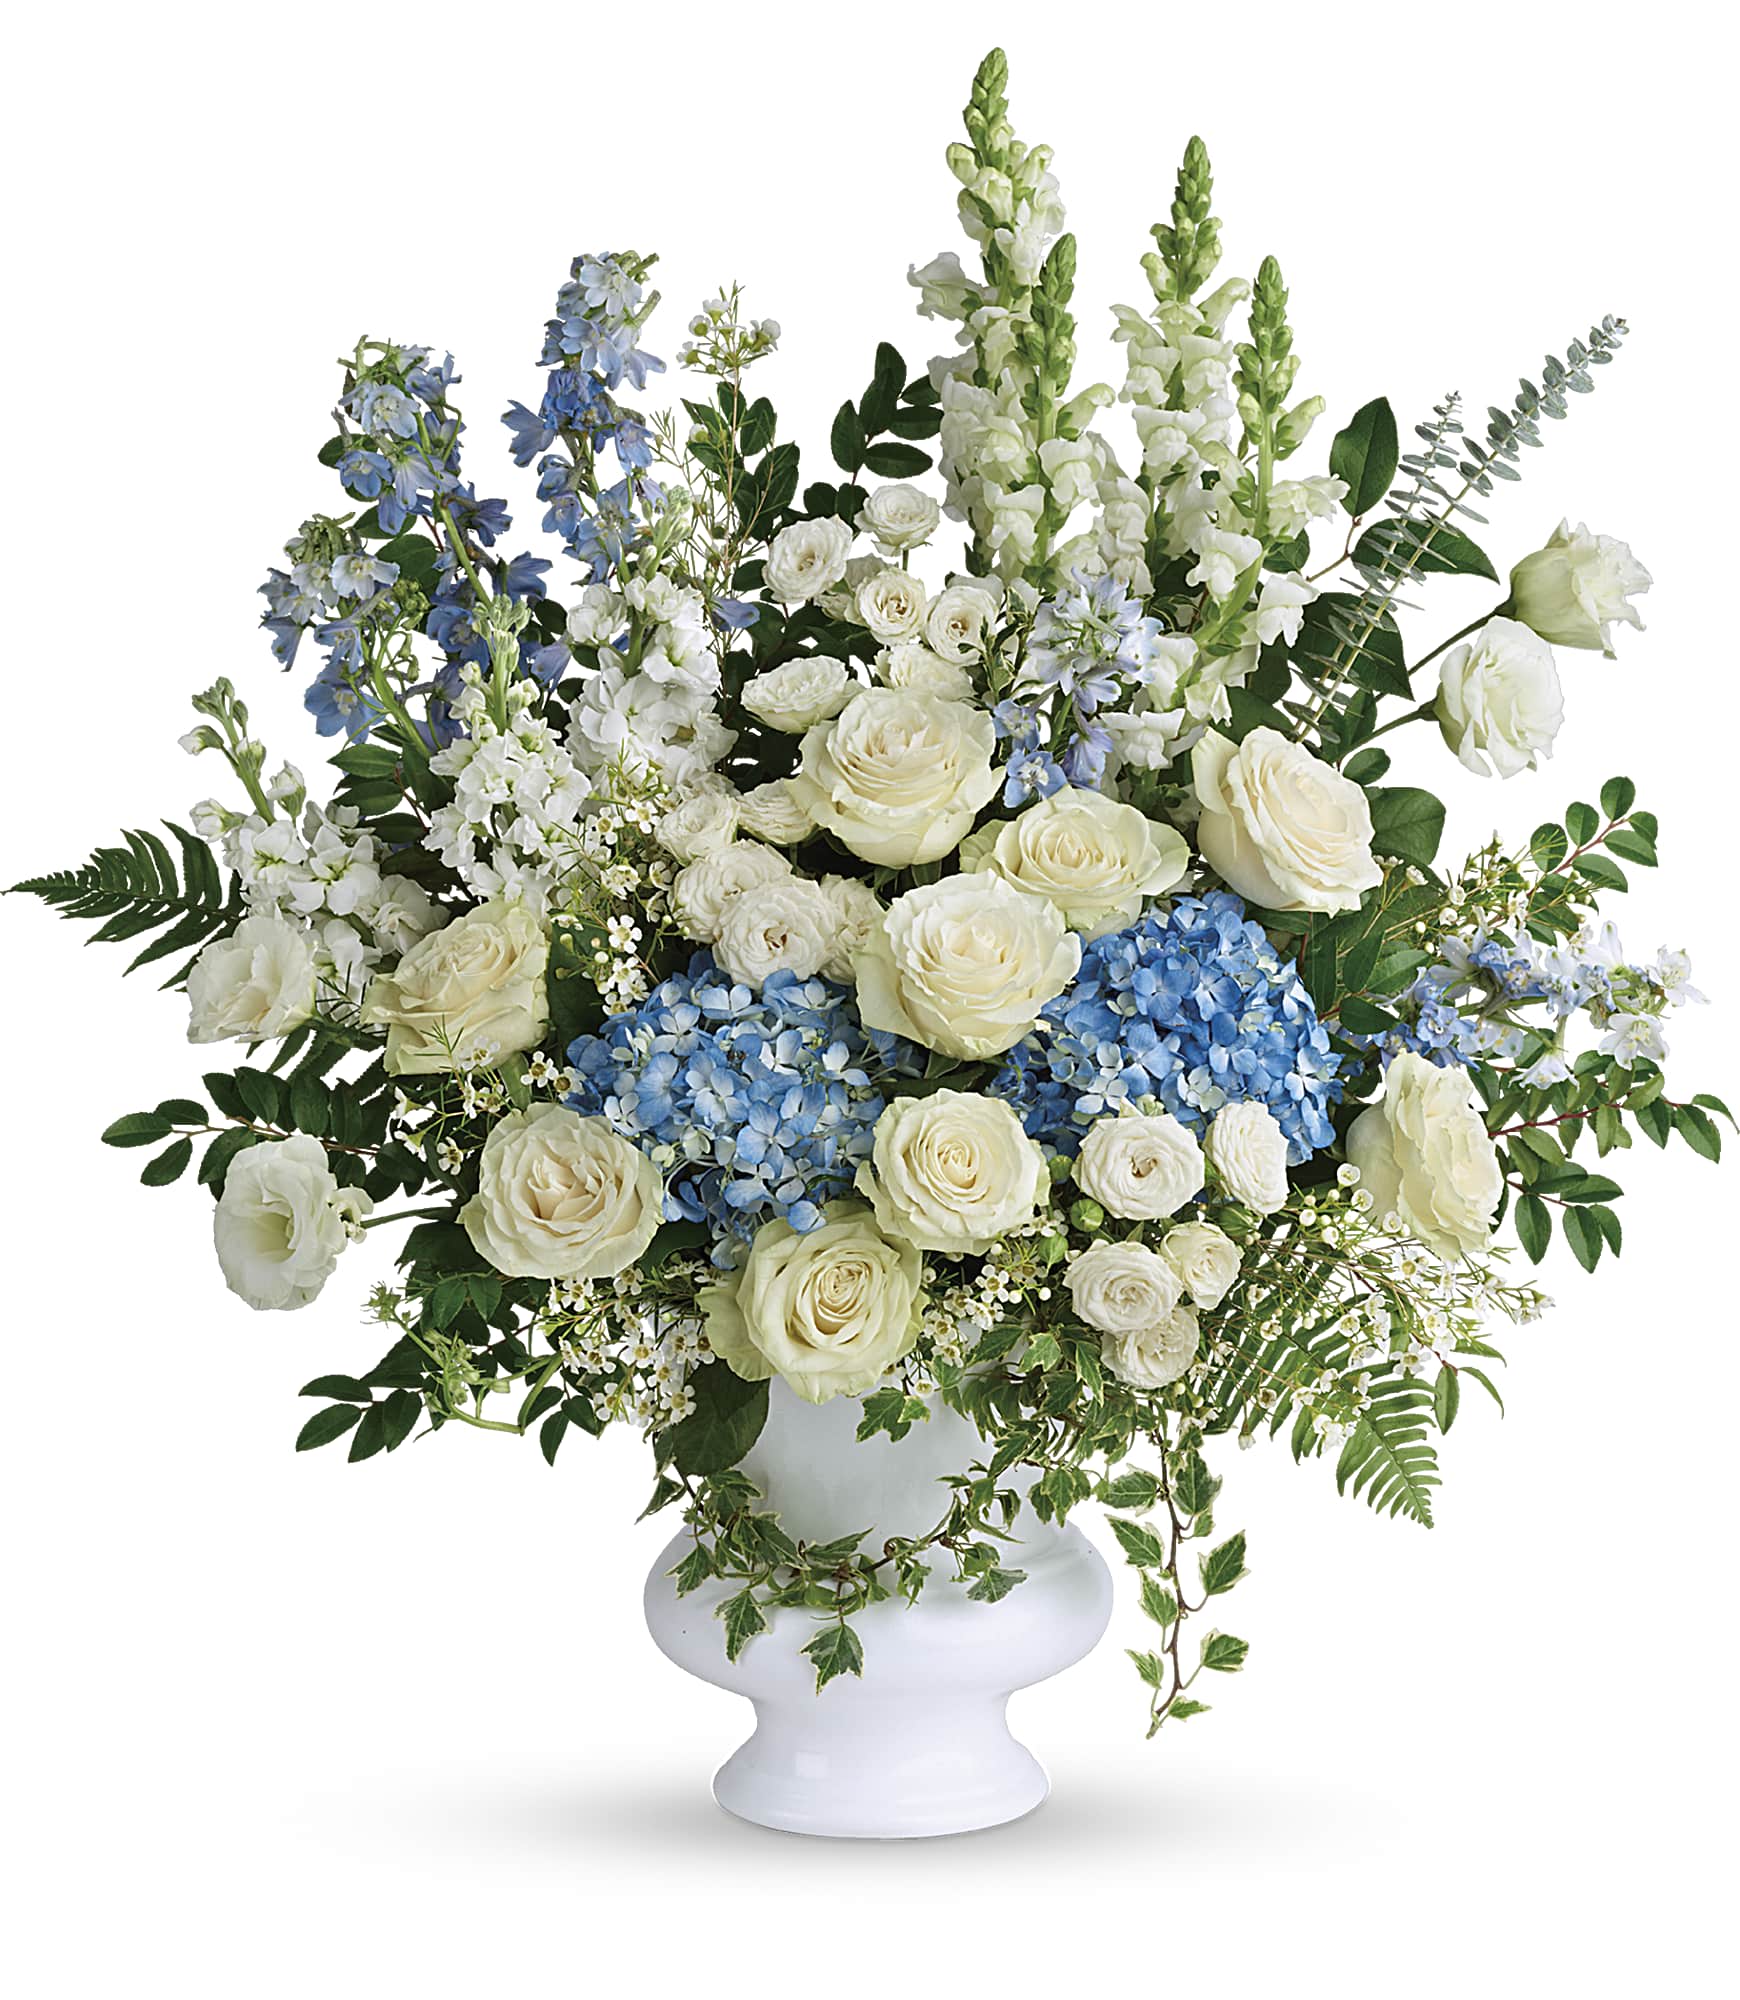 Treasured and Beloved Bouquet - A treasured tribute to your beloved, this gorgeously grand bouquet of soft blue hydrangea and pure white roses is reminiscent of a clear sky, a hopeful reminder of life and love. Call for color options and banner. Designed in Plastic vessel, but can be done in a basket- please call and let us know!